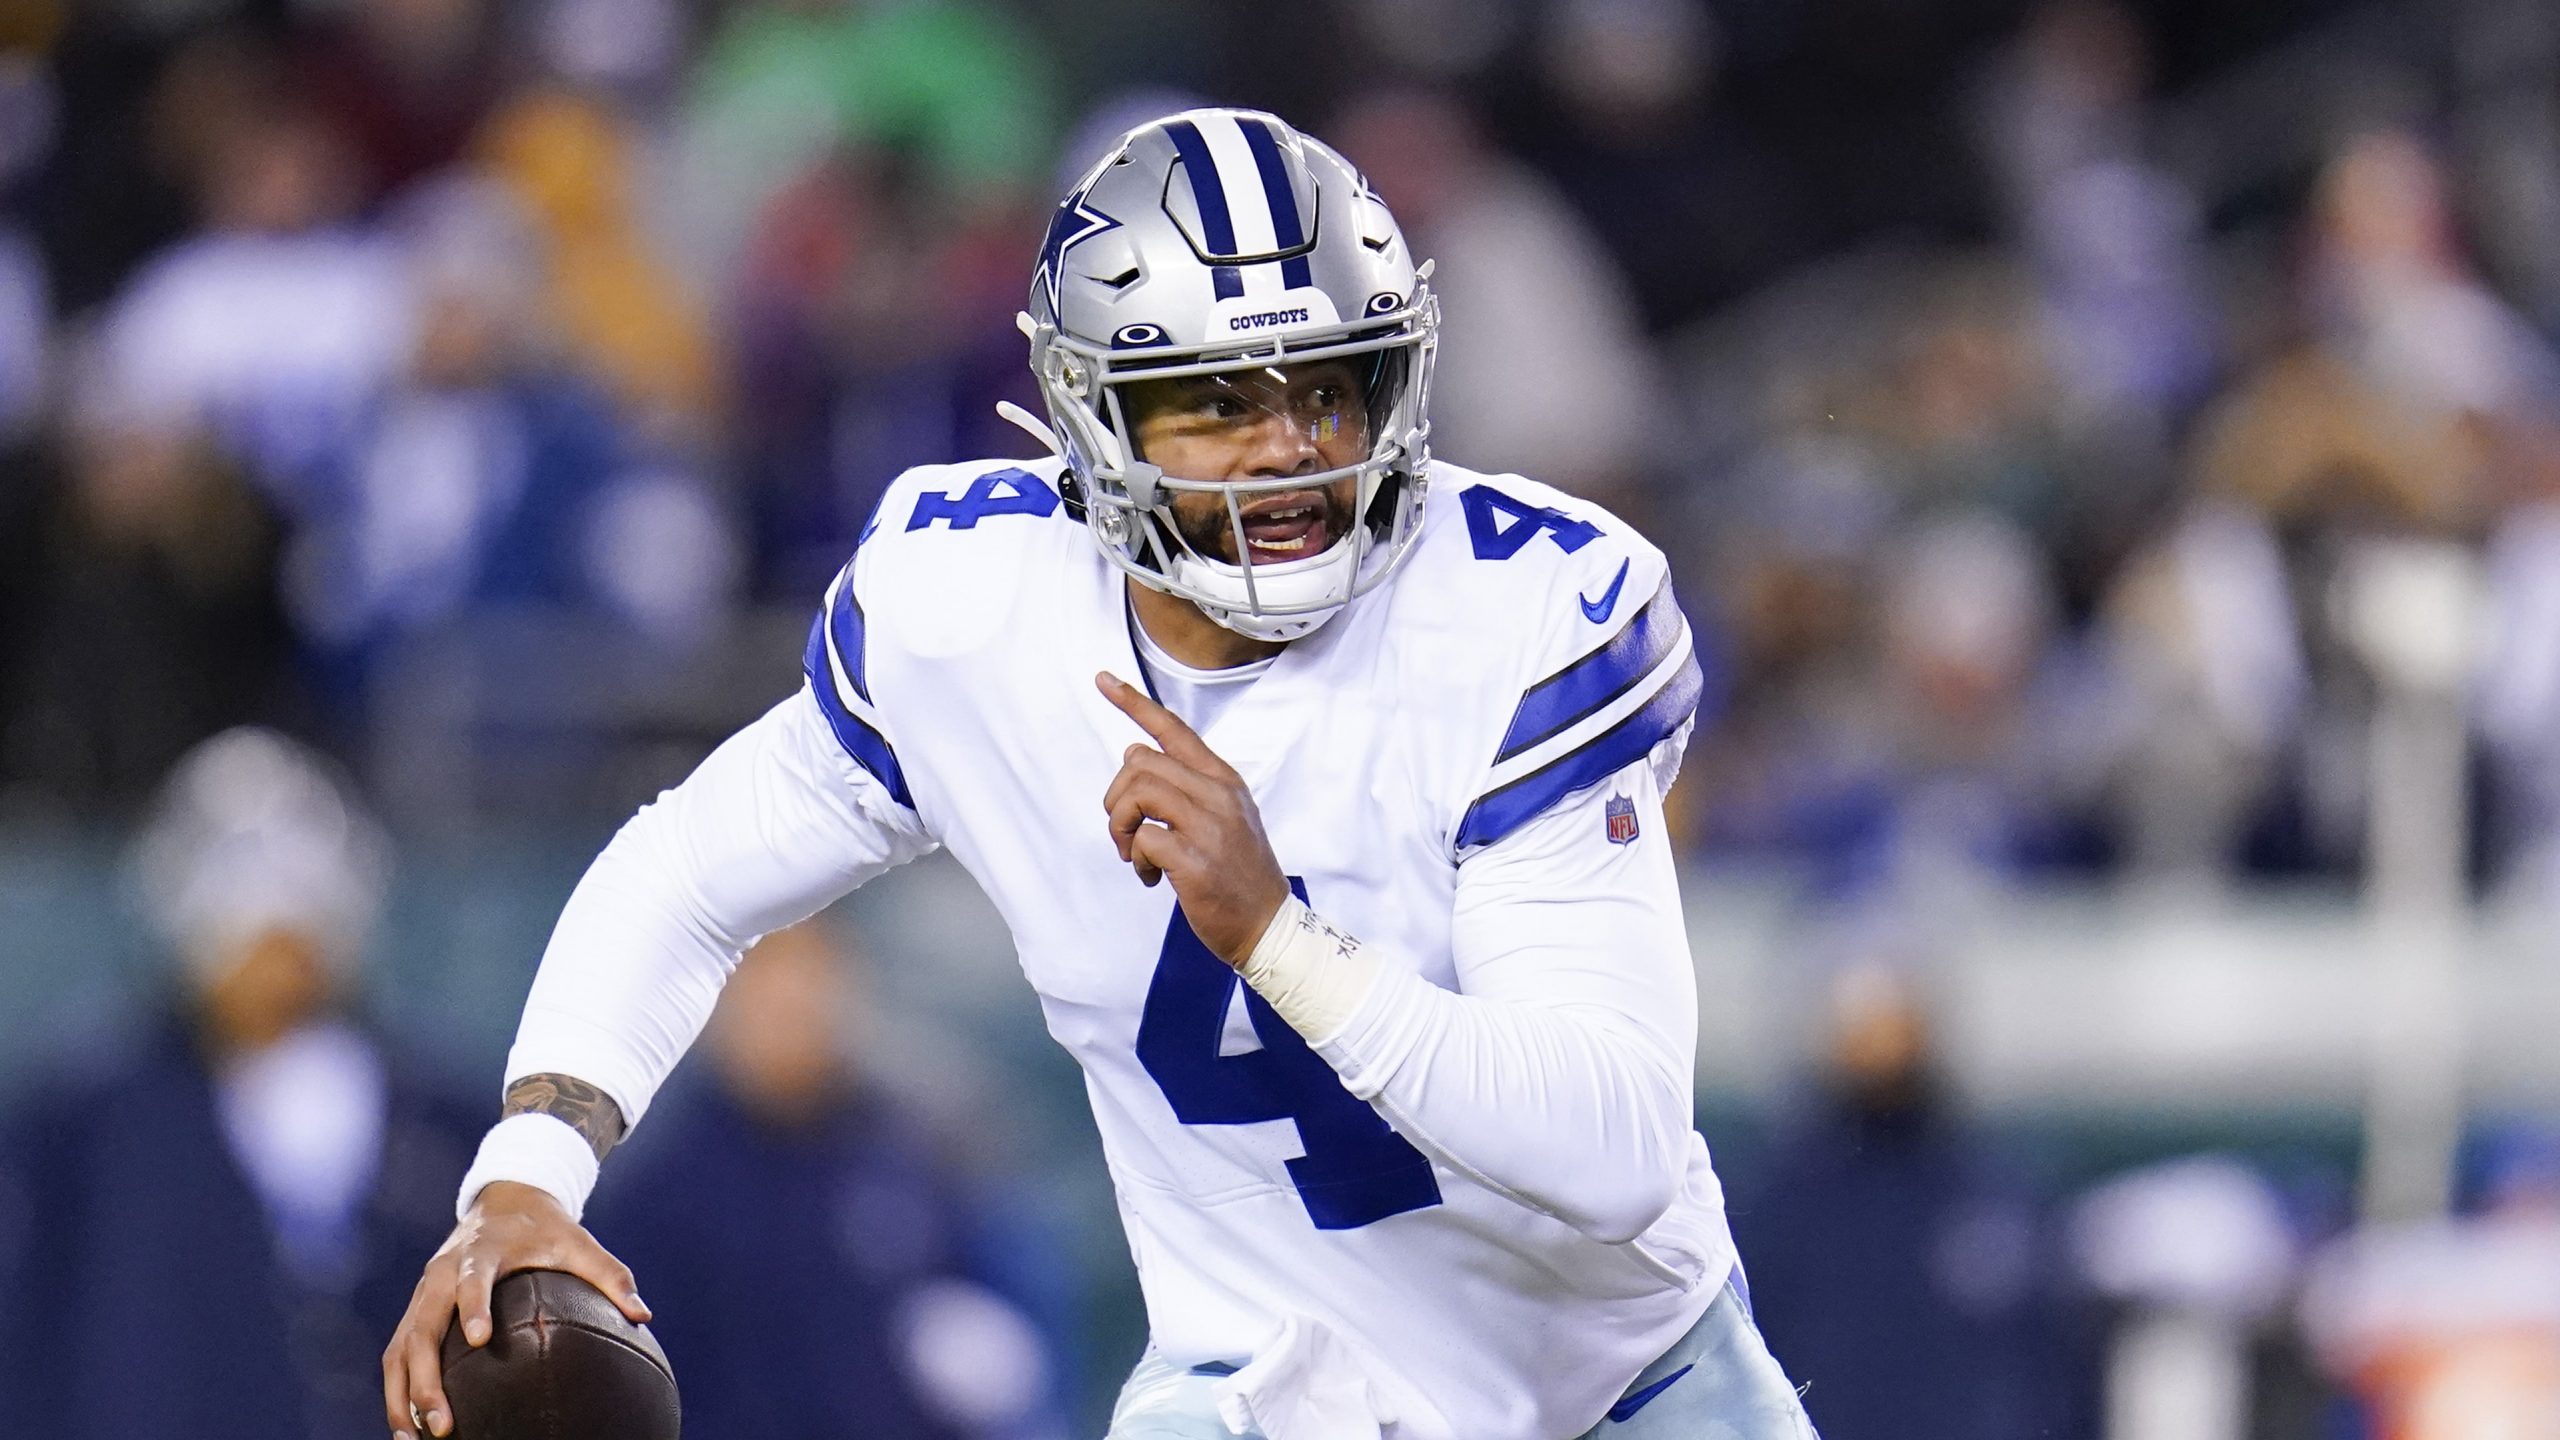 Dallas Cowboys quarterback Dak Prescott rolls out during the first half of an NFL football game between the Philadelphia Eagles and the Dallas Cowboys, Saturday, Jan. 8, 2022, in Philadelphia